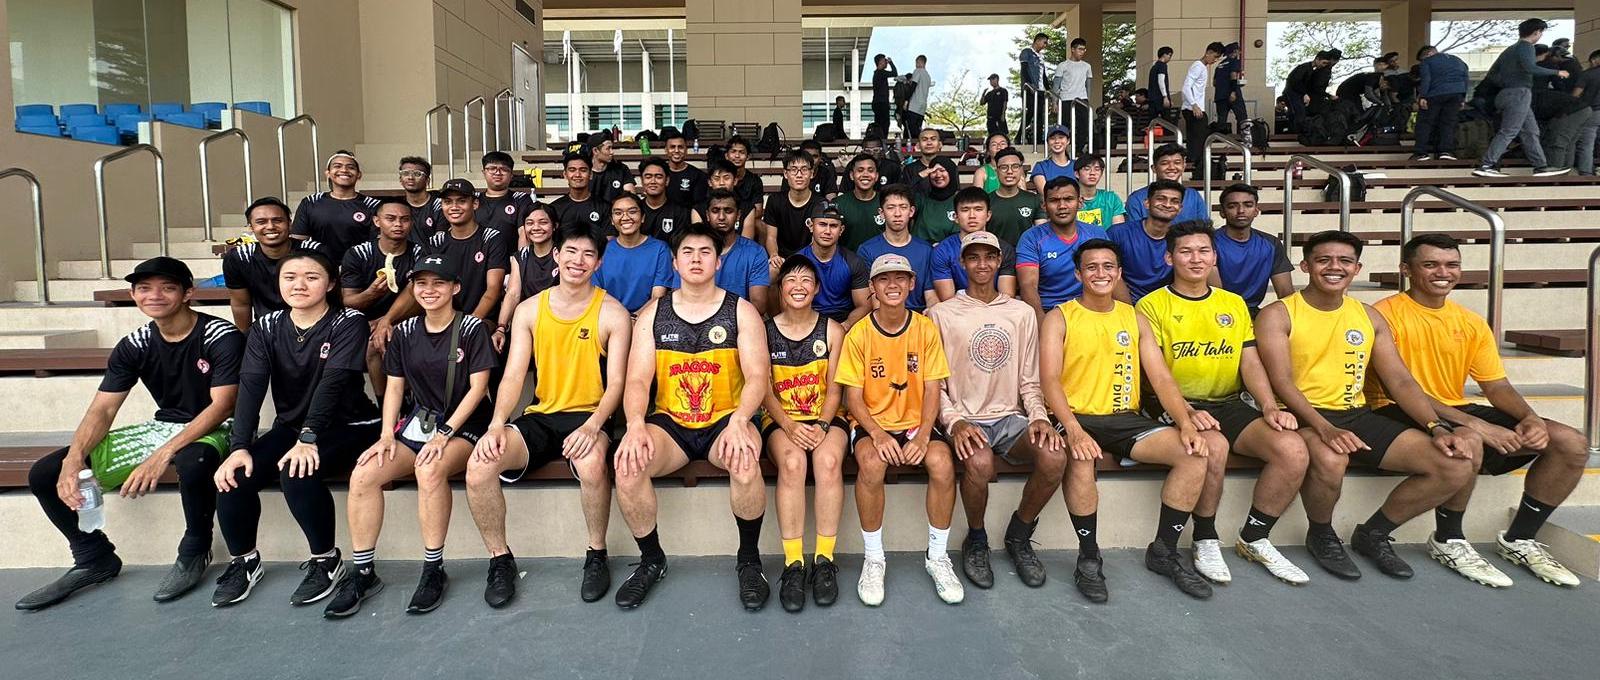 The Frisbee teams at the SCDF Inter-unit Games 2023-2024 in October 2023